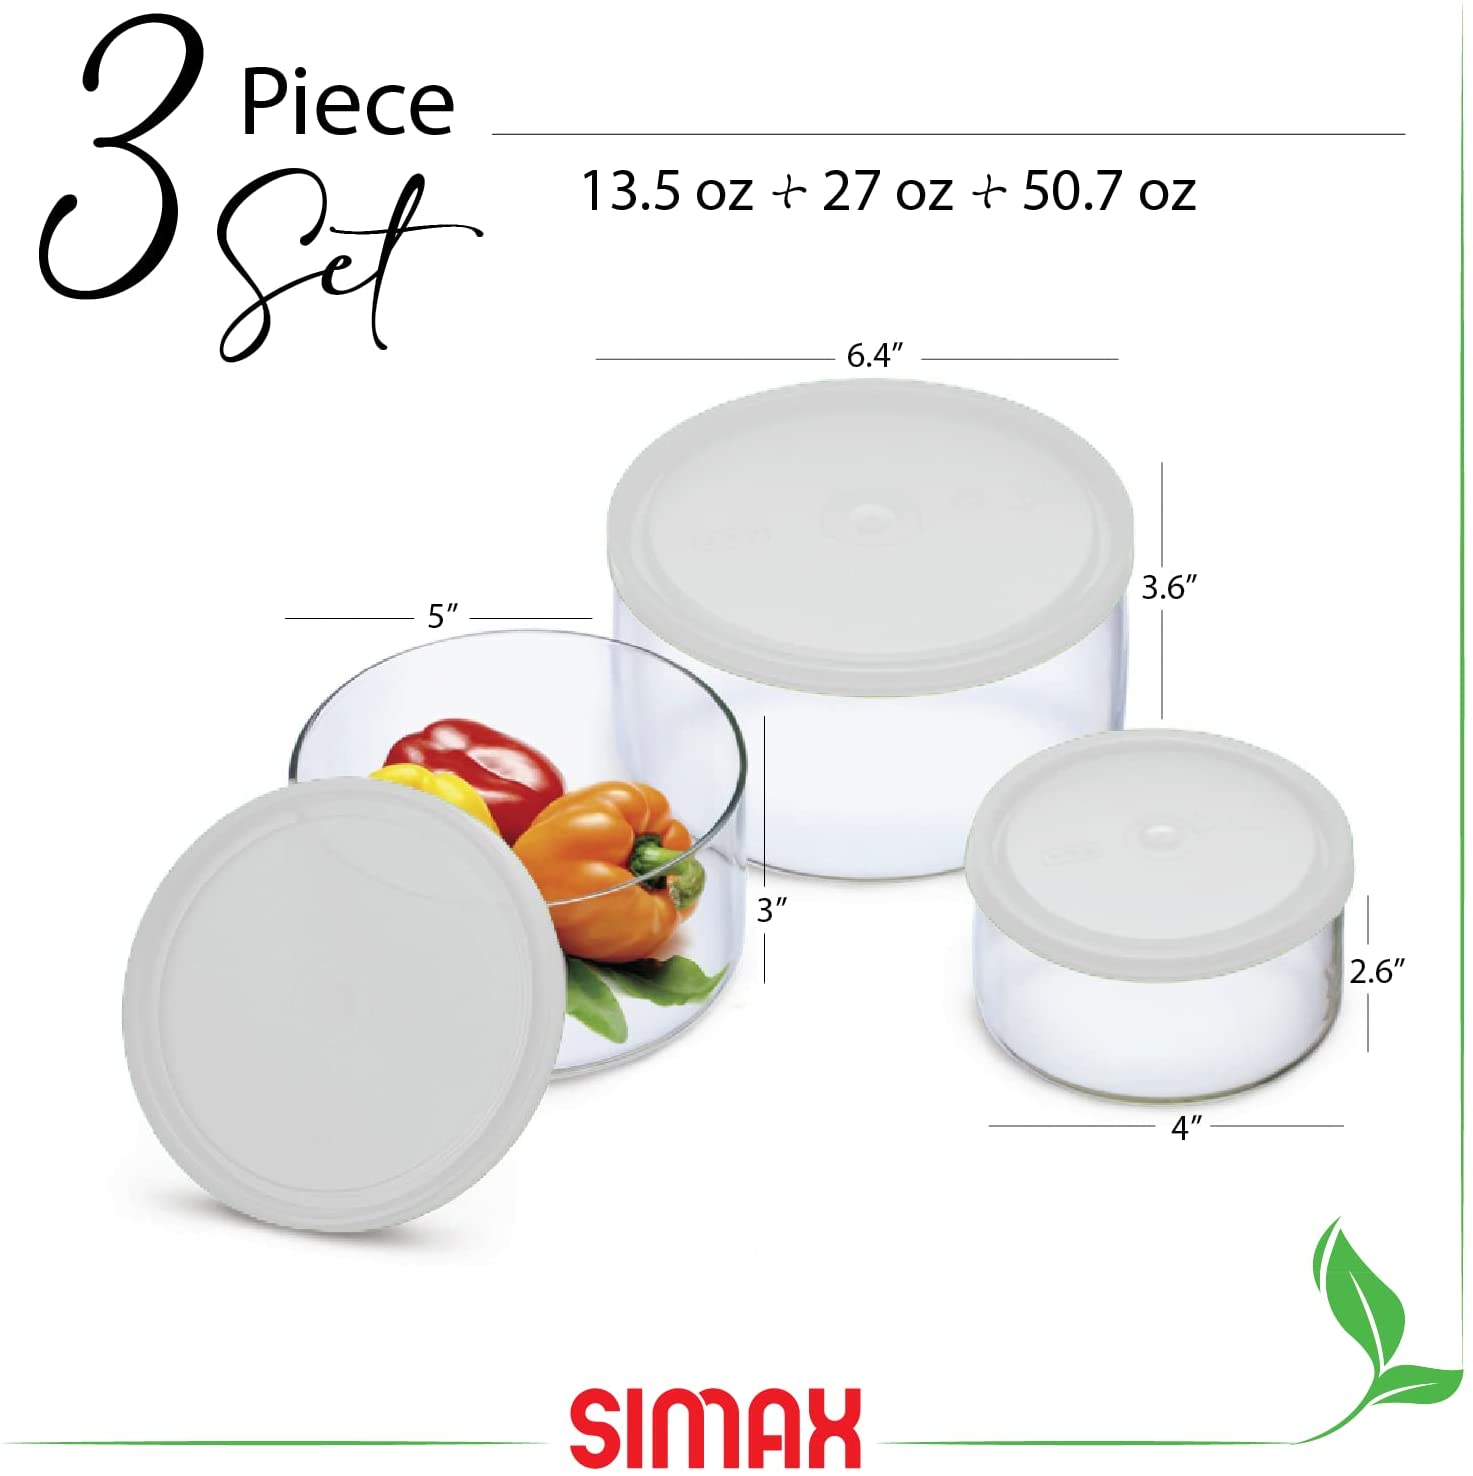 Simax Round Glass Meal Prep and Storage Containers | With Plastic Lids – 3 Piece Set, Assorted Sizes – Oven, Microwave, and Dishwasher Safe – Includes 50 Oz, 27 Oz, 13.5 Oz - image 2 of 3